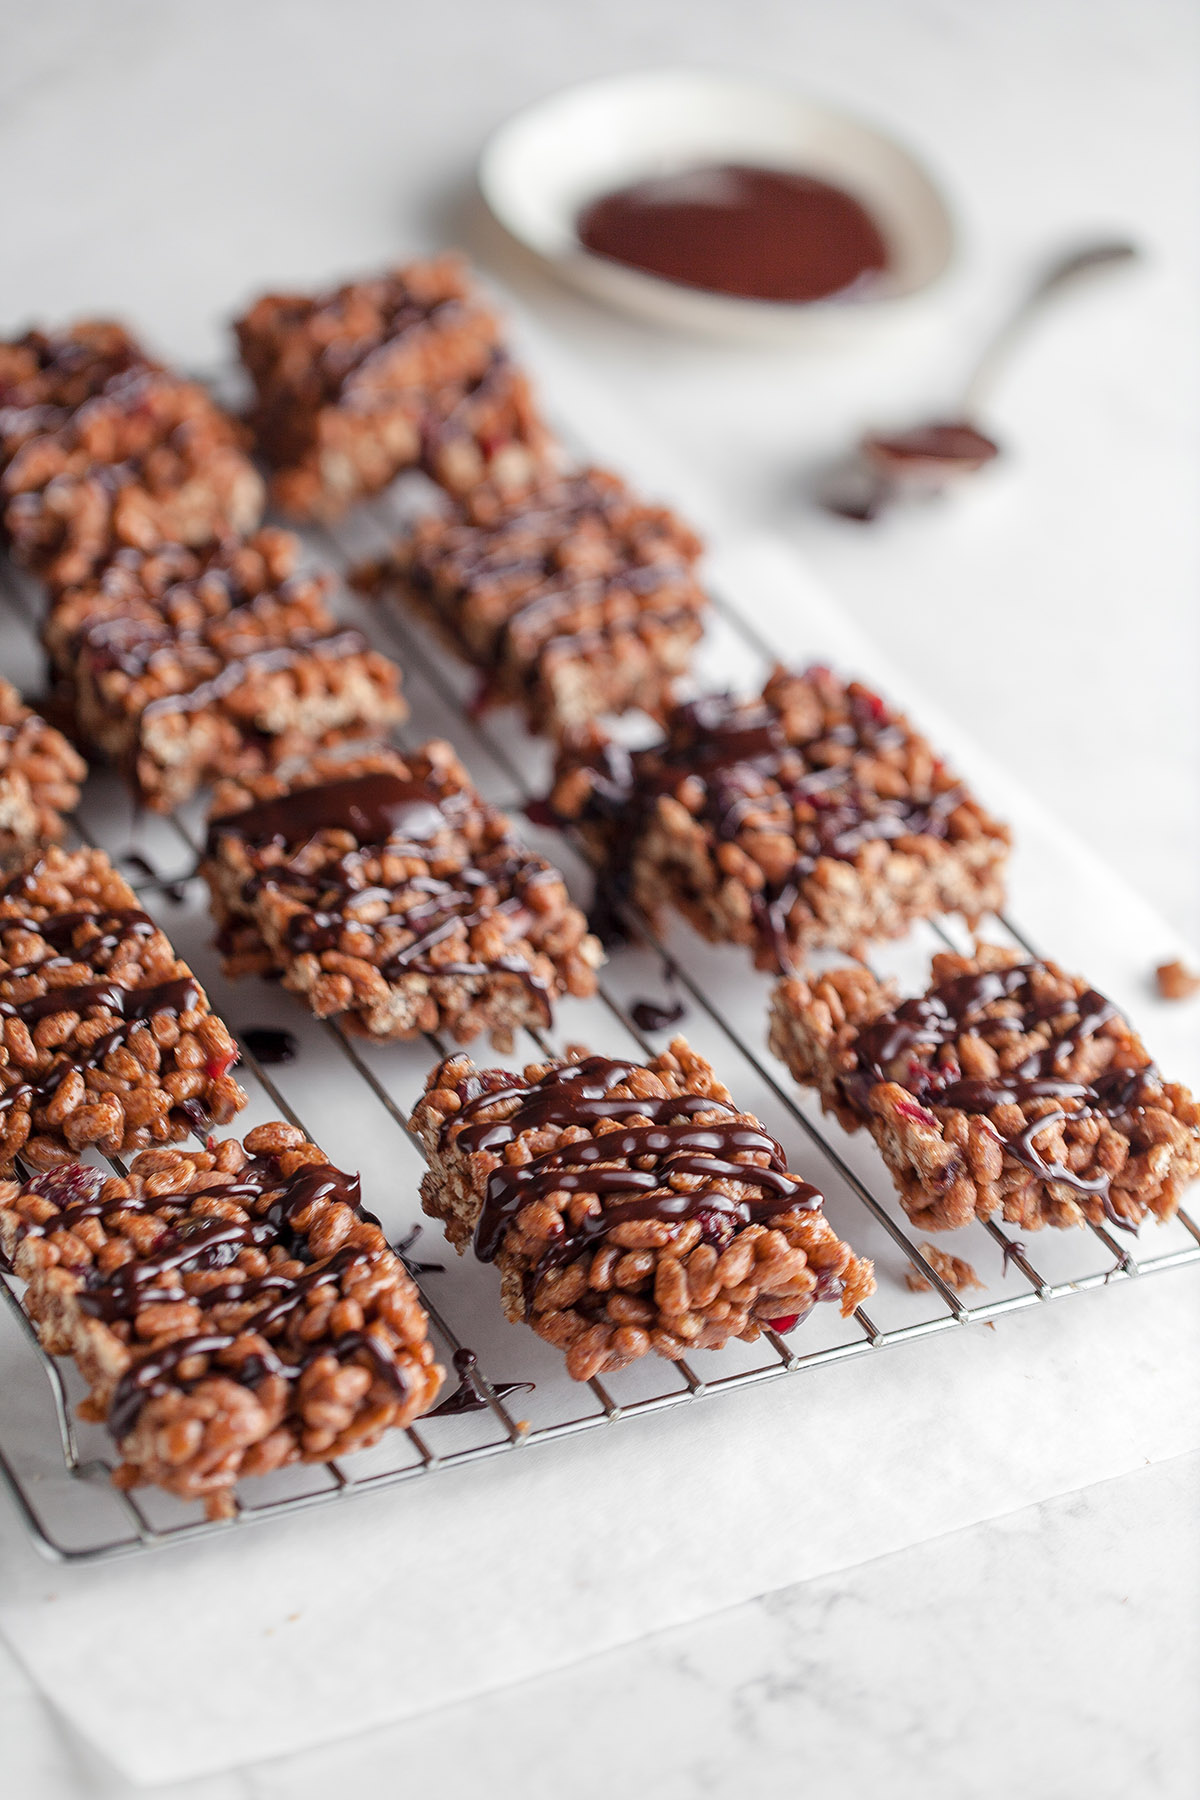 Olive Oil Chocolate and Cherry Krispie Treats